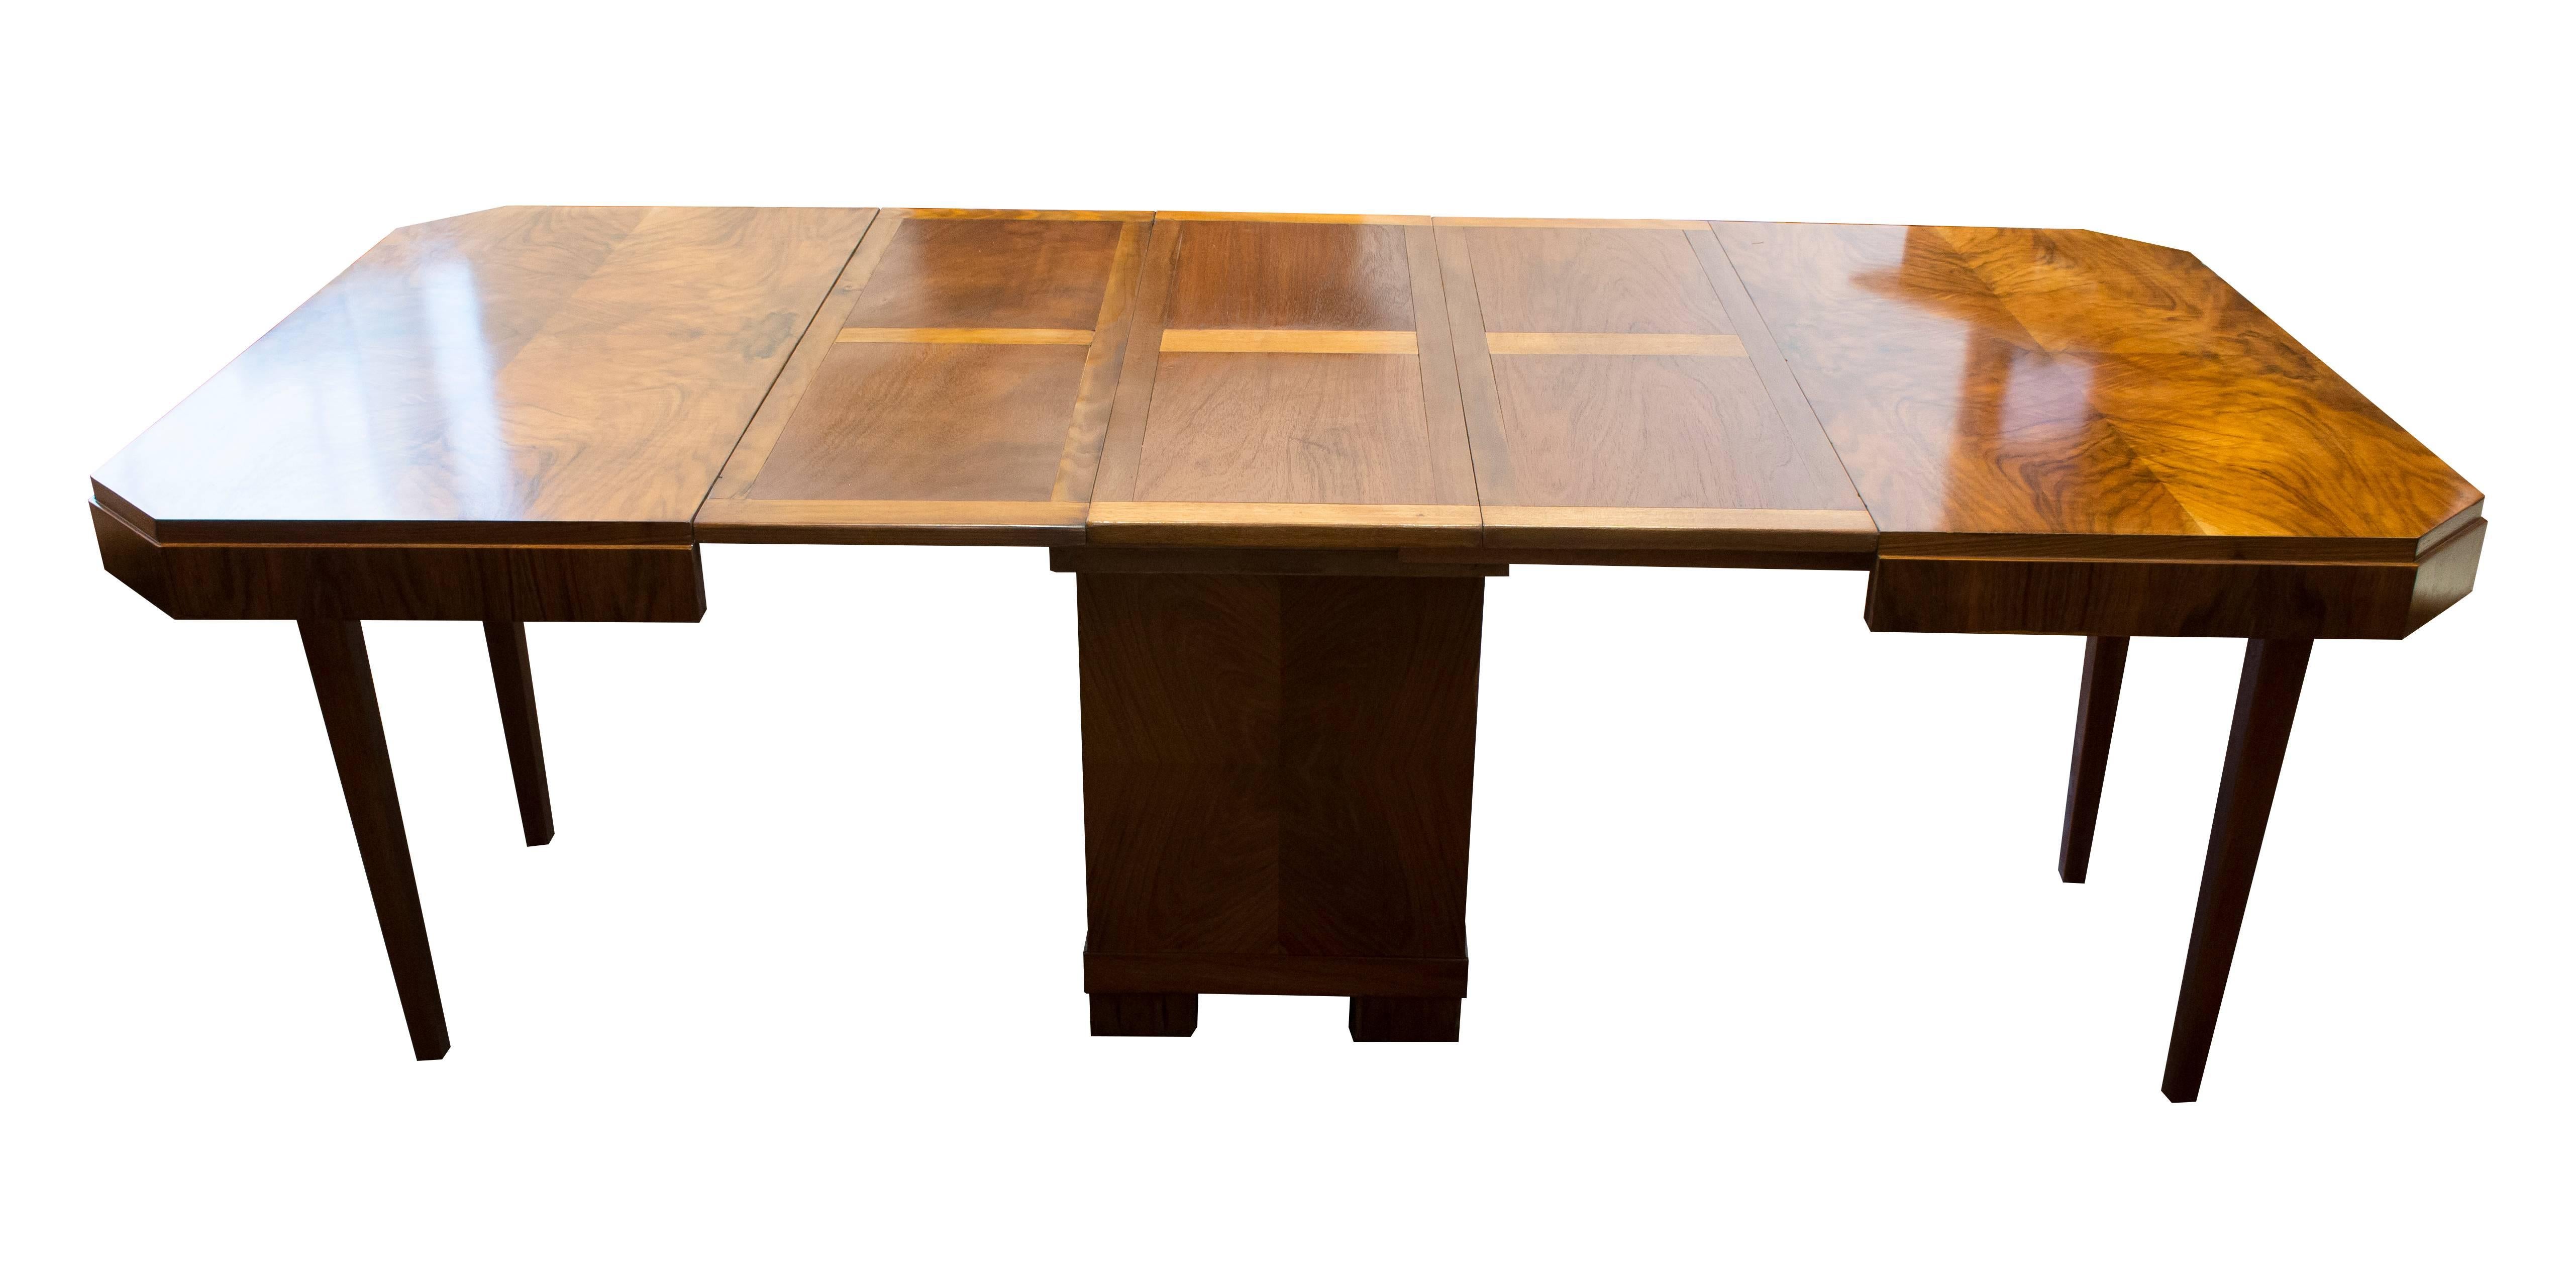 Very nice table from the Art Deco period, circa 1920. The table is made of walnut and can be extended. The table can be extended by 3 x 33cm (max 210cm). If the table is extended, additional support legs can be folded down on both sides.